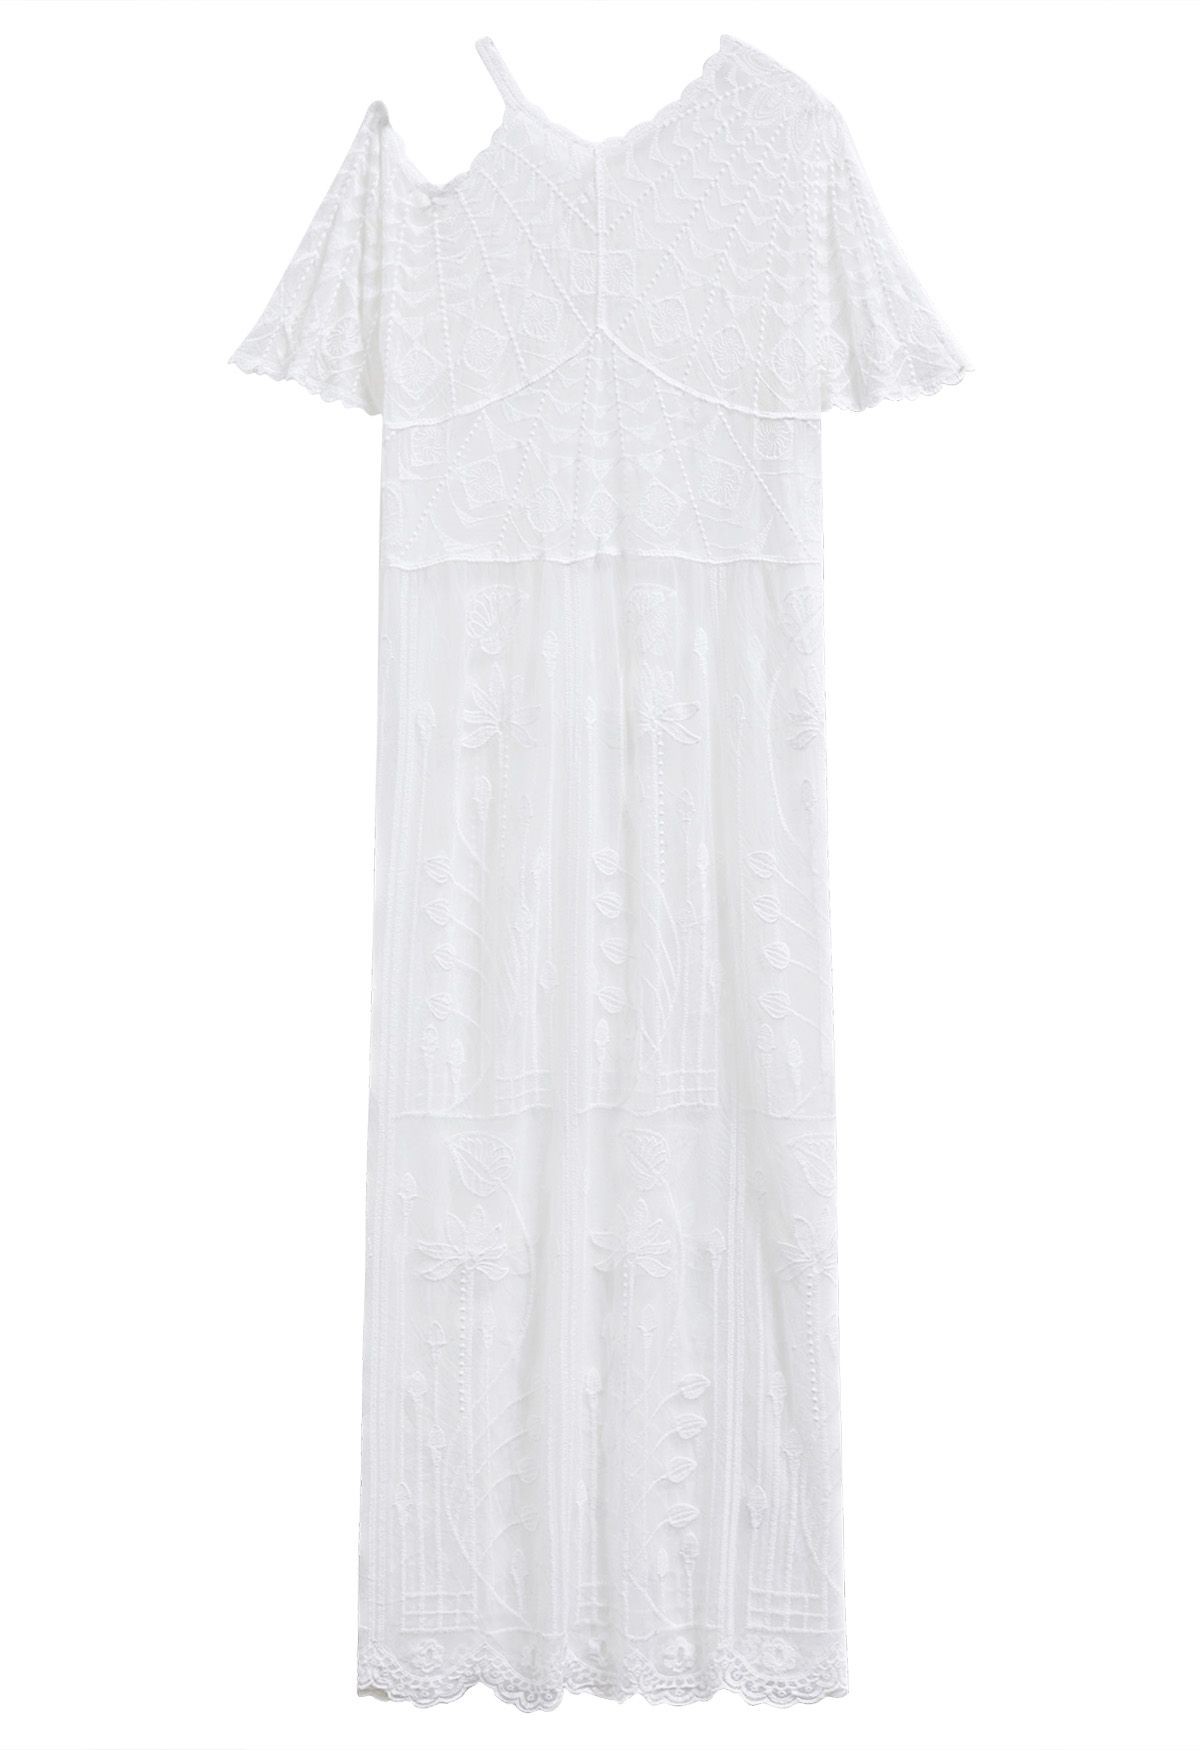 Embroidered Lace Cutout Shoulder Cover-Up Dress